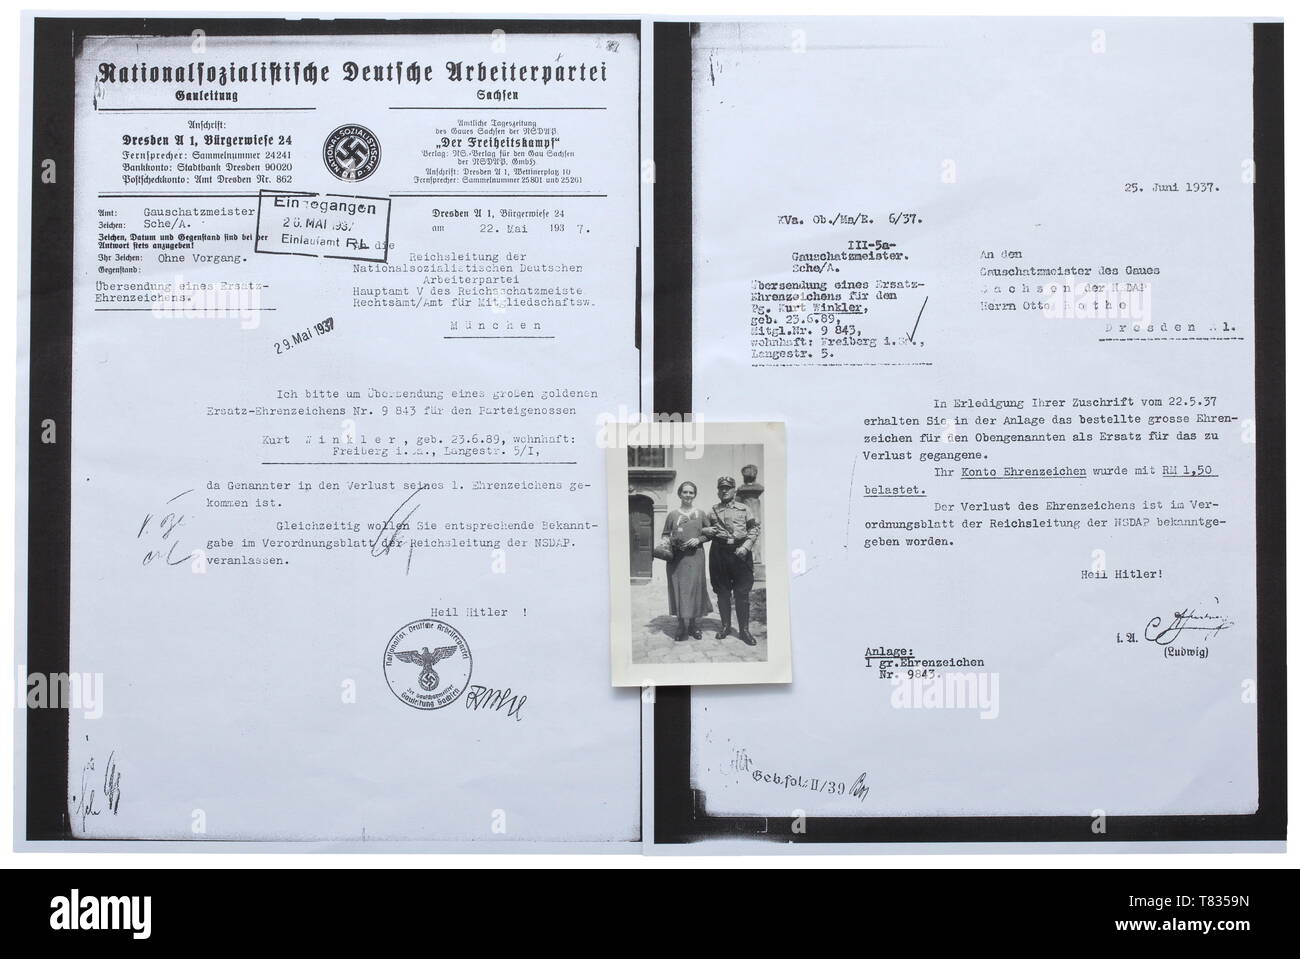 The estate of 'party comrade' Kurt Winkler Consisting of the large issue of the Golden Party Badge (reverse 'Ges. Gesch.', award number '9843') and the small issue (reverse attachment modified long ago, award number '9843'), the General Gau Honour Badge with year cipher 1923 (enamelled silver, reverse punched maker's and fineness mark 'R. Wächter & Lange Mittweida 800'), a three-piece large orders clasp (EK II of 1939, NSDAP Long Service Awards 2nd and 3rd Class) as well as a photo of Winkler in NSKK uniform next to his wife. Included is a photocopy of an extract of Winkler, Editorial-Use-Only Stock Photo